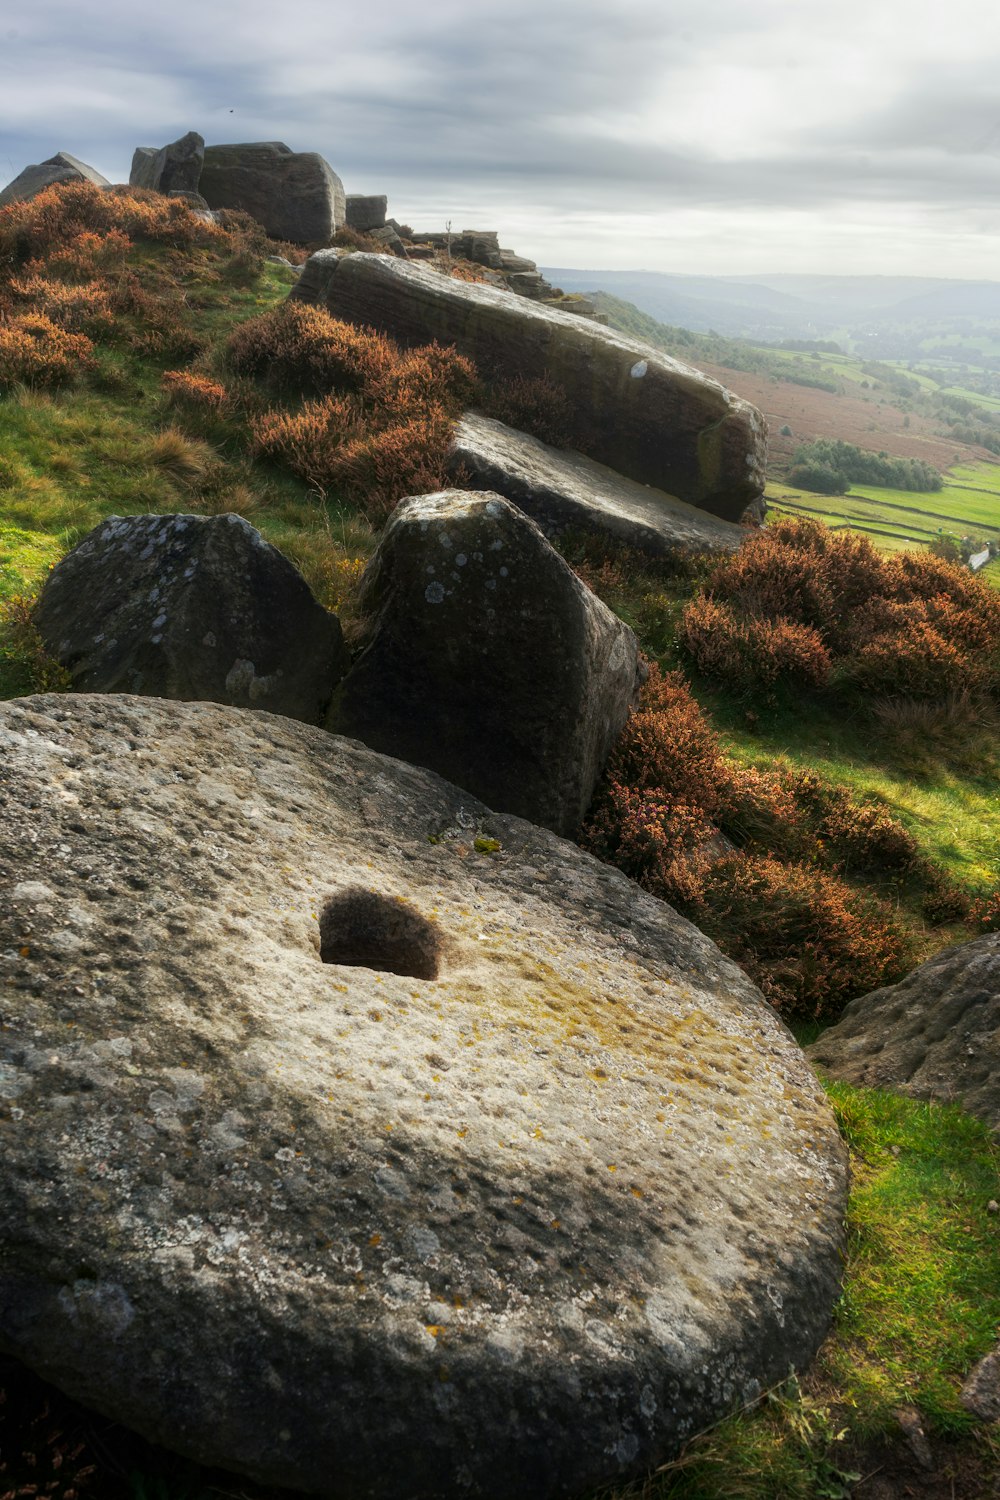 a large rock sitting on top of a lush green hillside